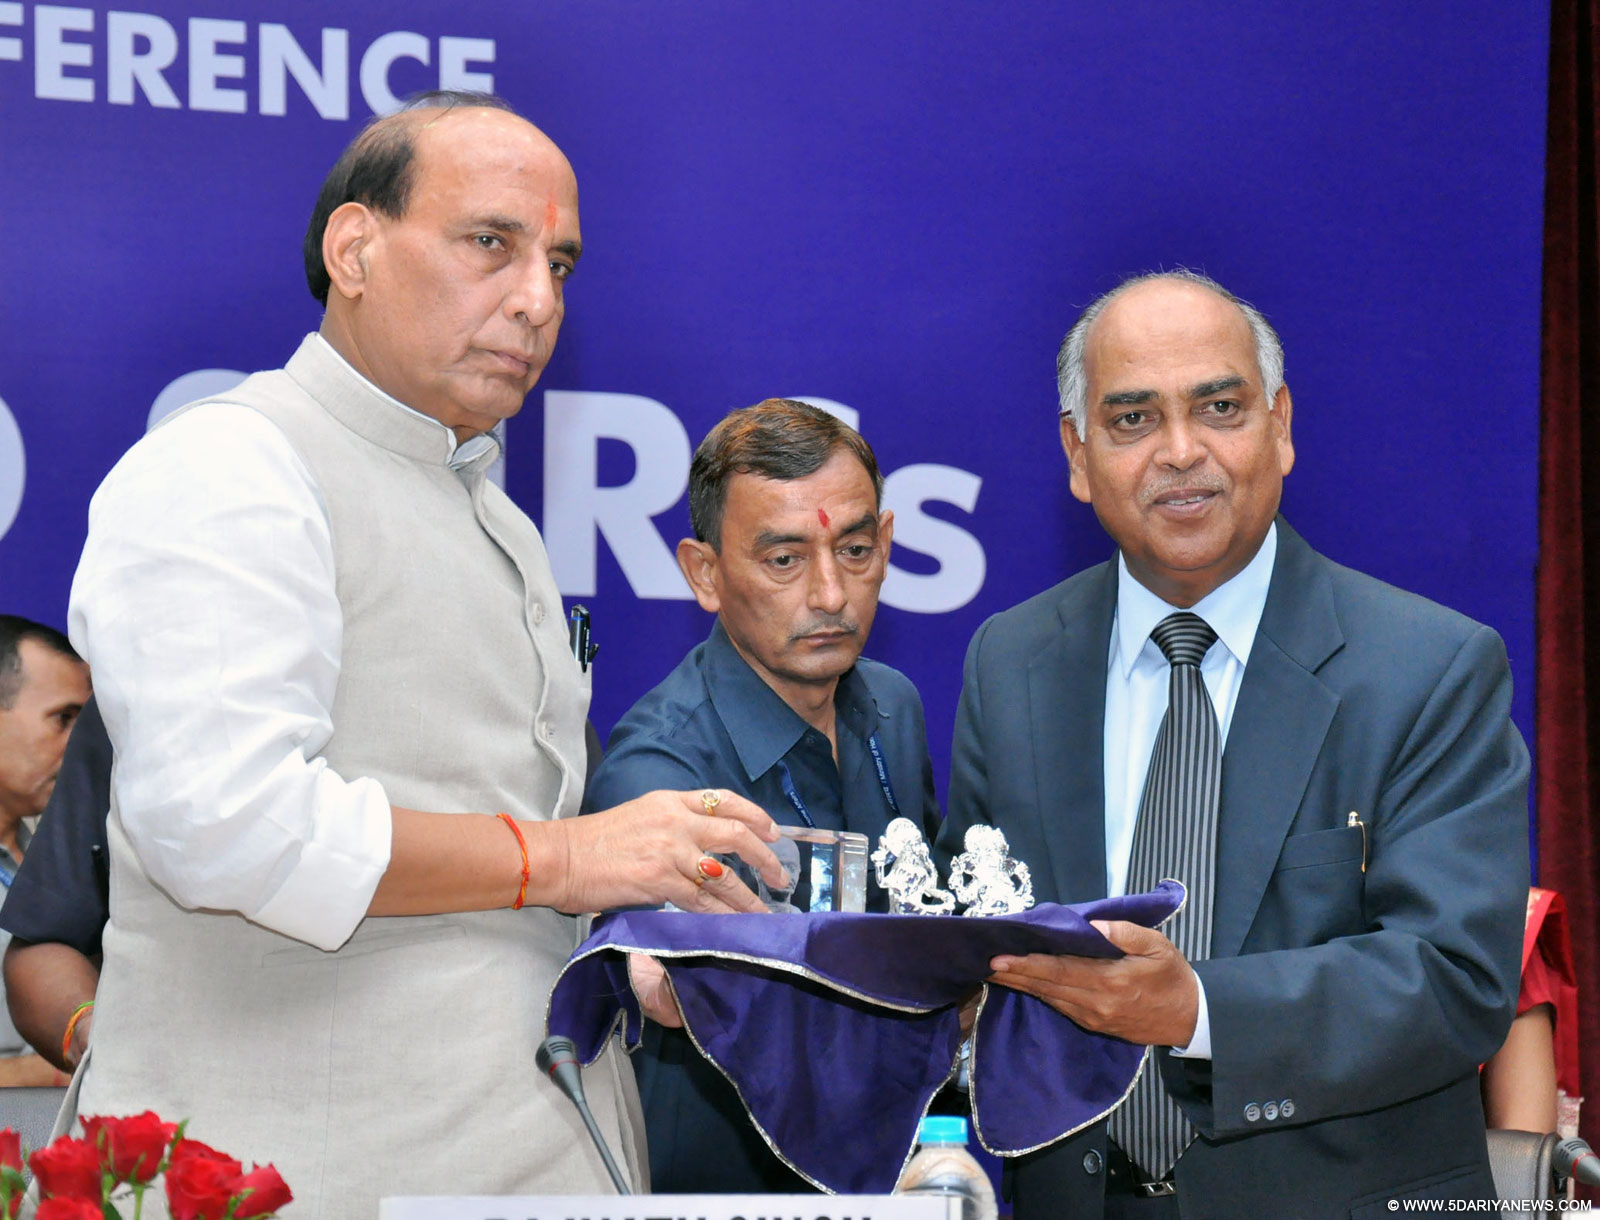 The Chairperson, National Human Rights Commission (NHRC), Justice Cyriac Joseph presenting a memento to the Union Home Minister, Shri Rajnath Singh, at the inauguration of a Conference of the National Human Rights Commission (NHRC) and the State Human Rights Commissions (SHRCs), in New Delhi on September 18, 2015.